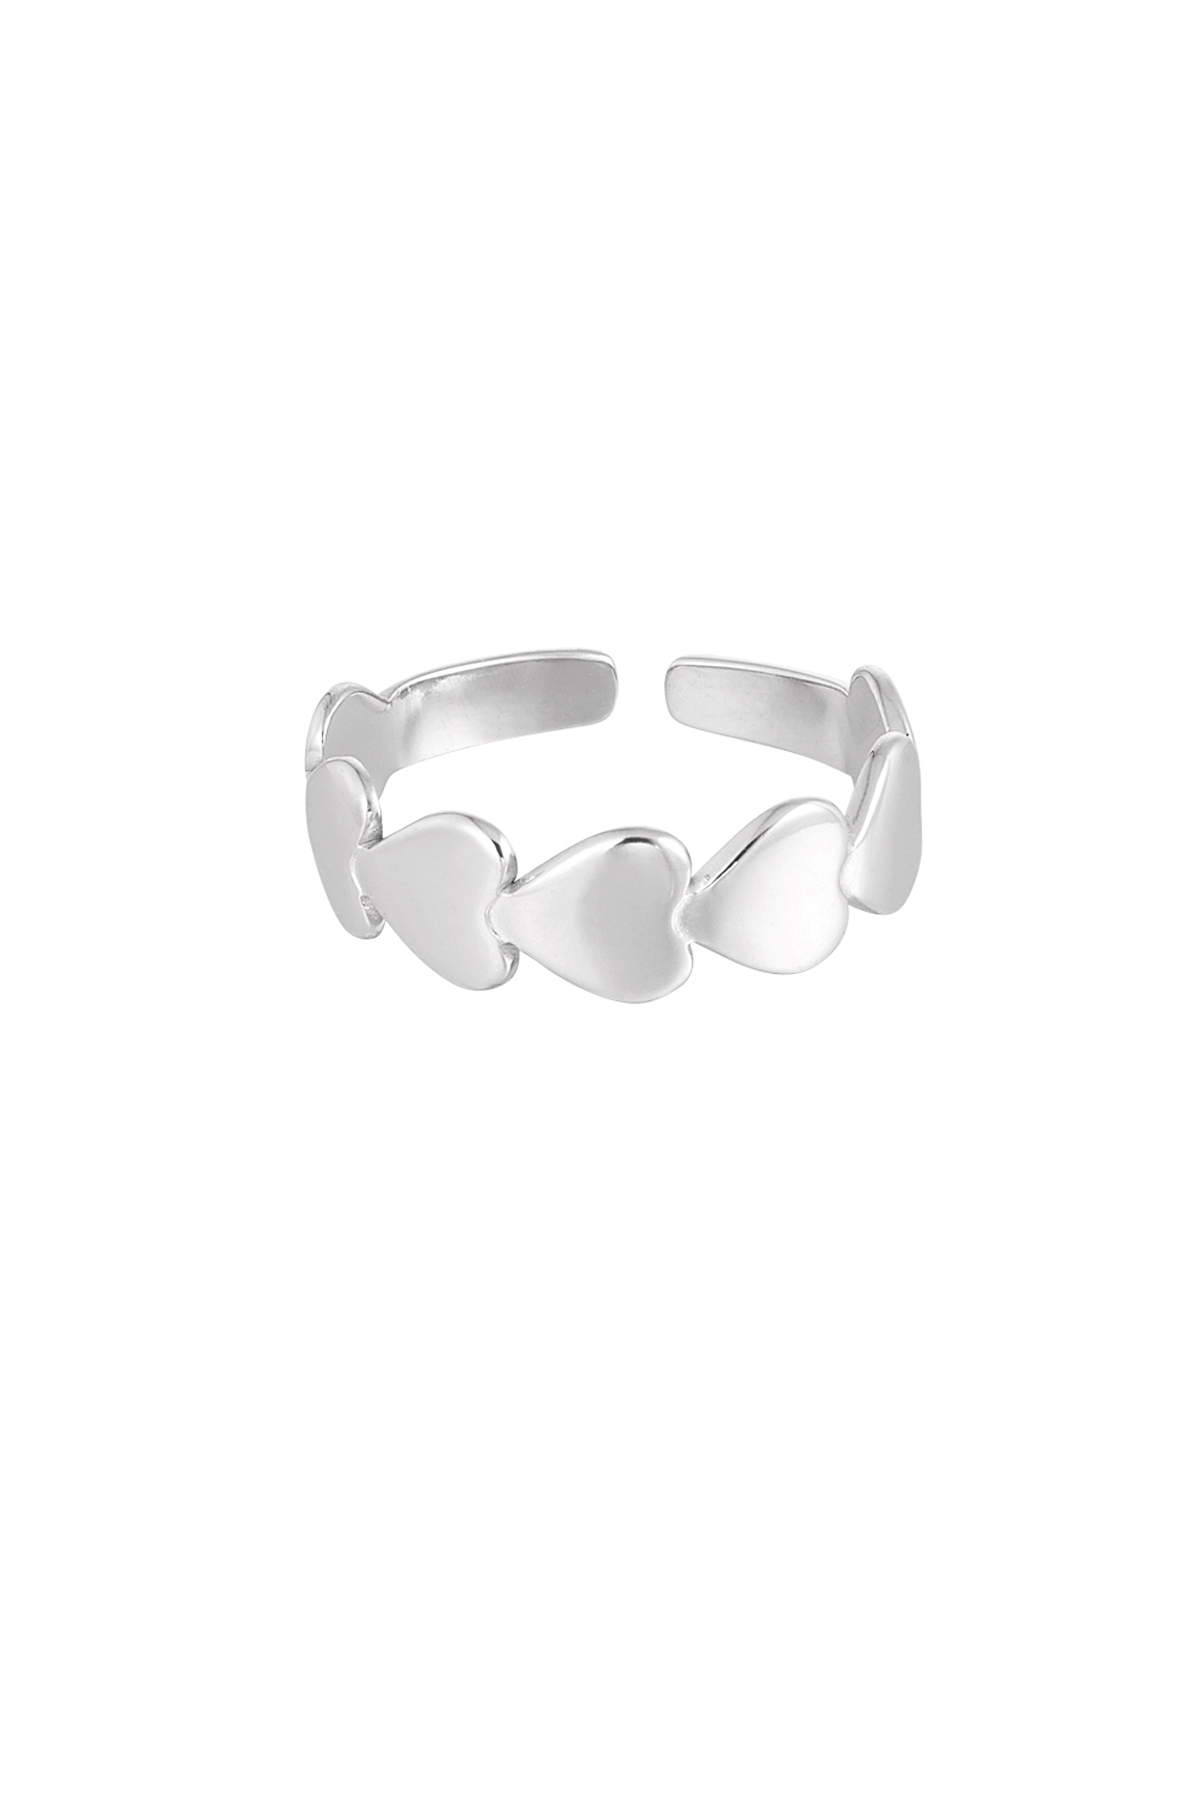 Ring hearts - silver h5 